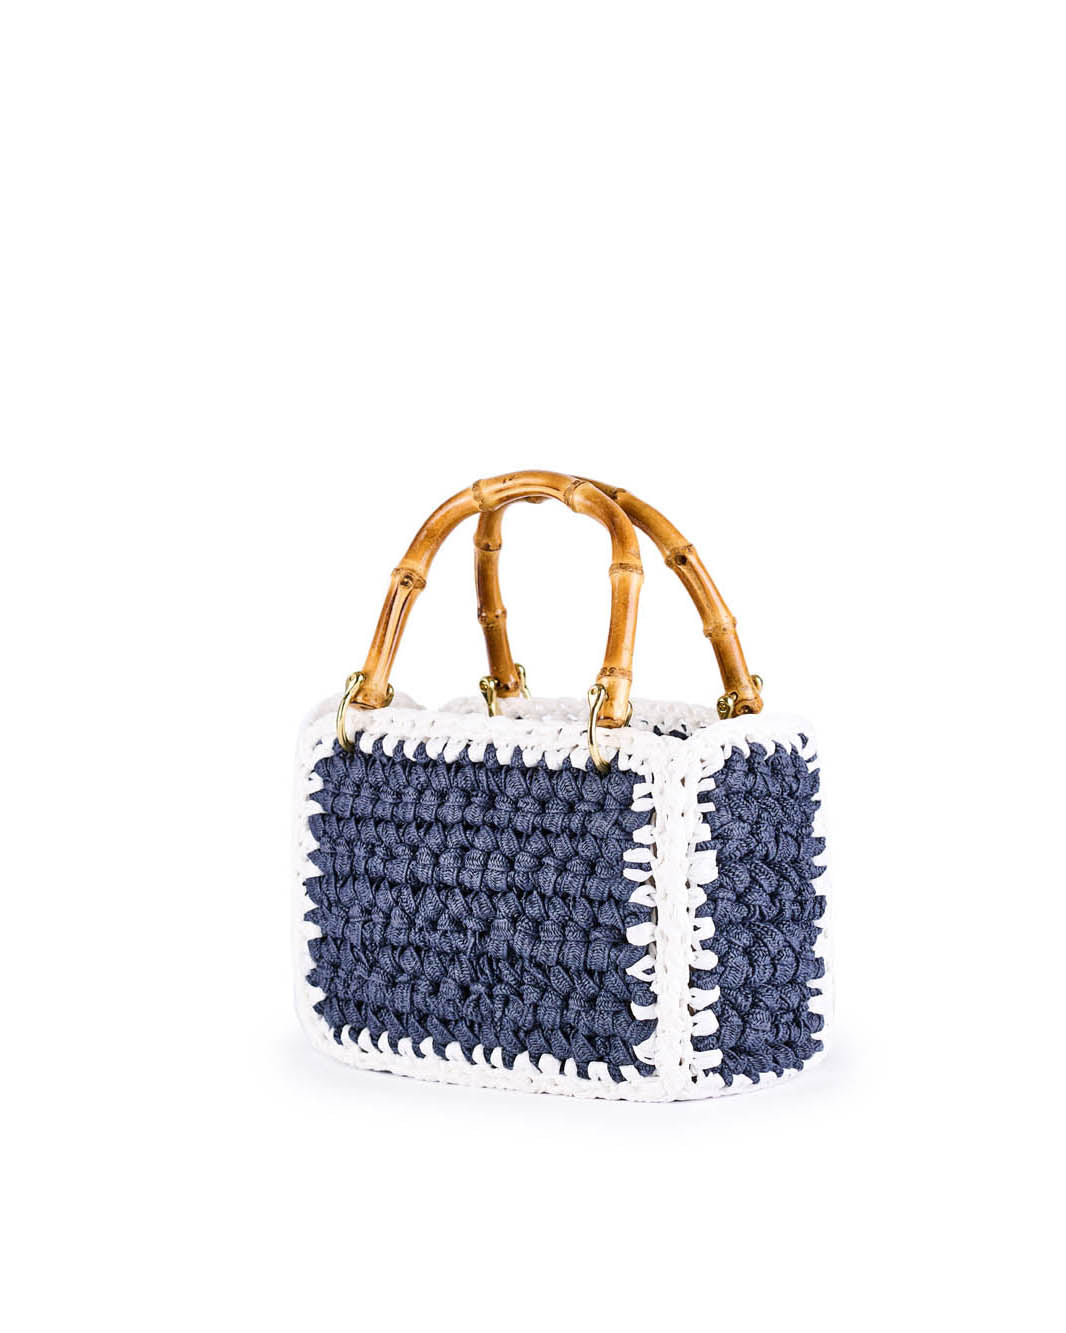 Handwoven navy and white tote bag with bamboo handles